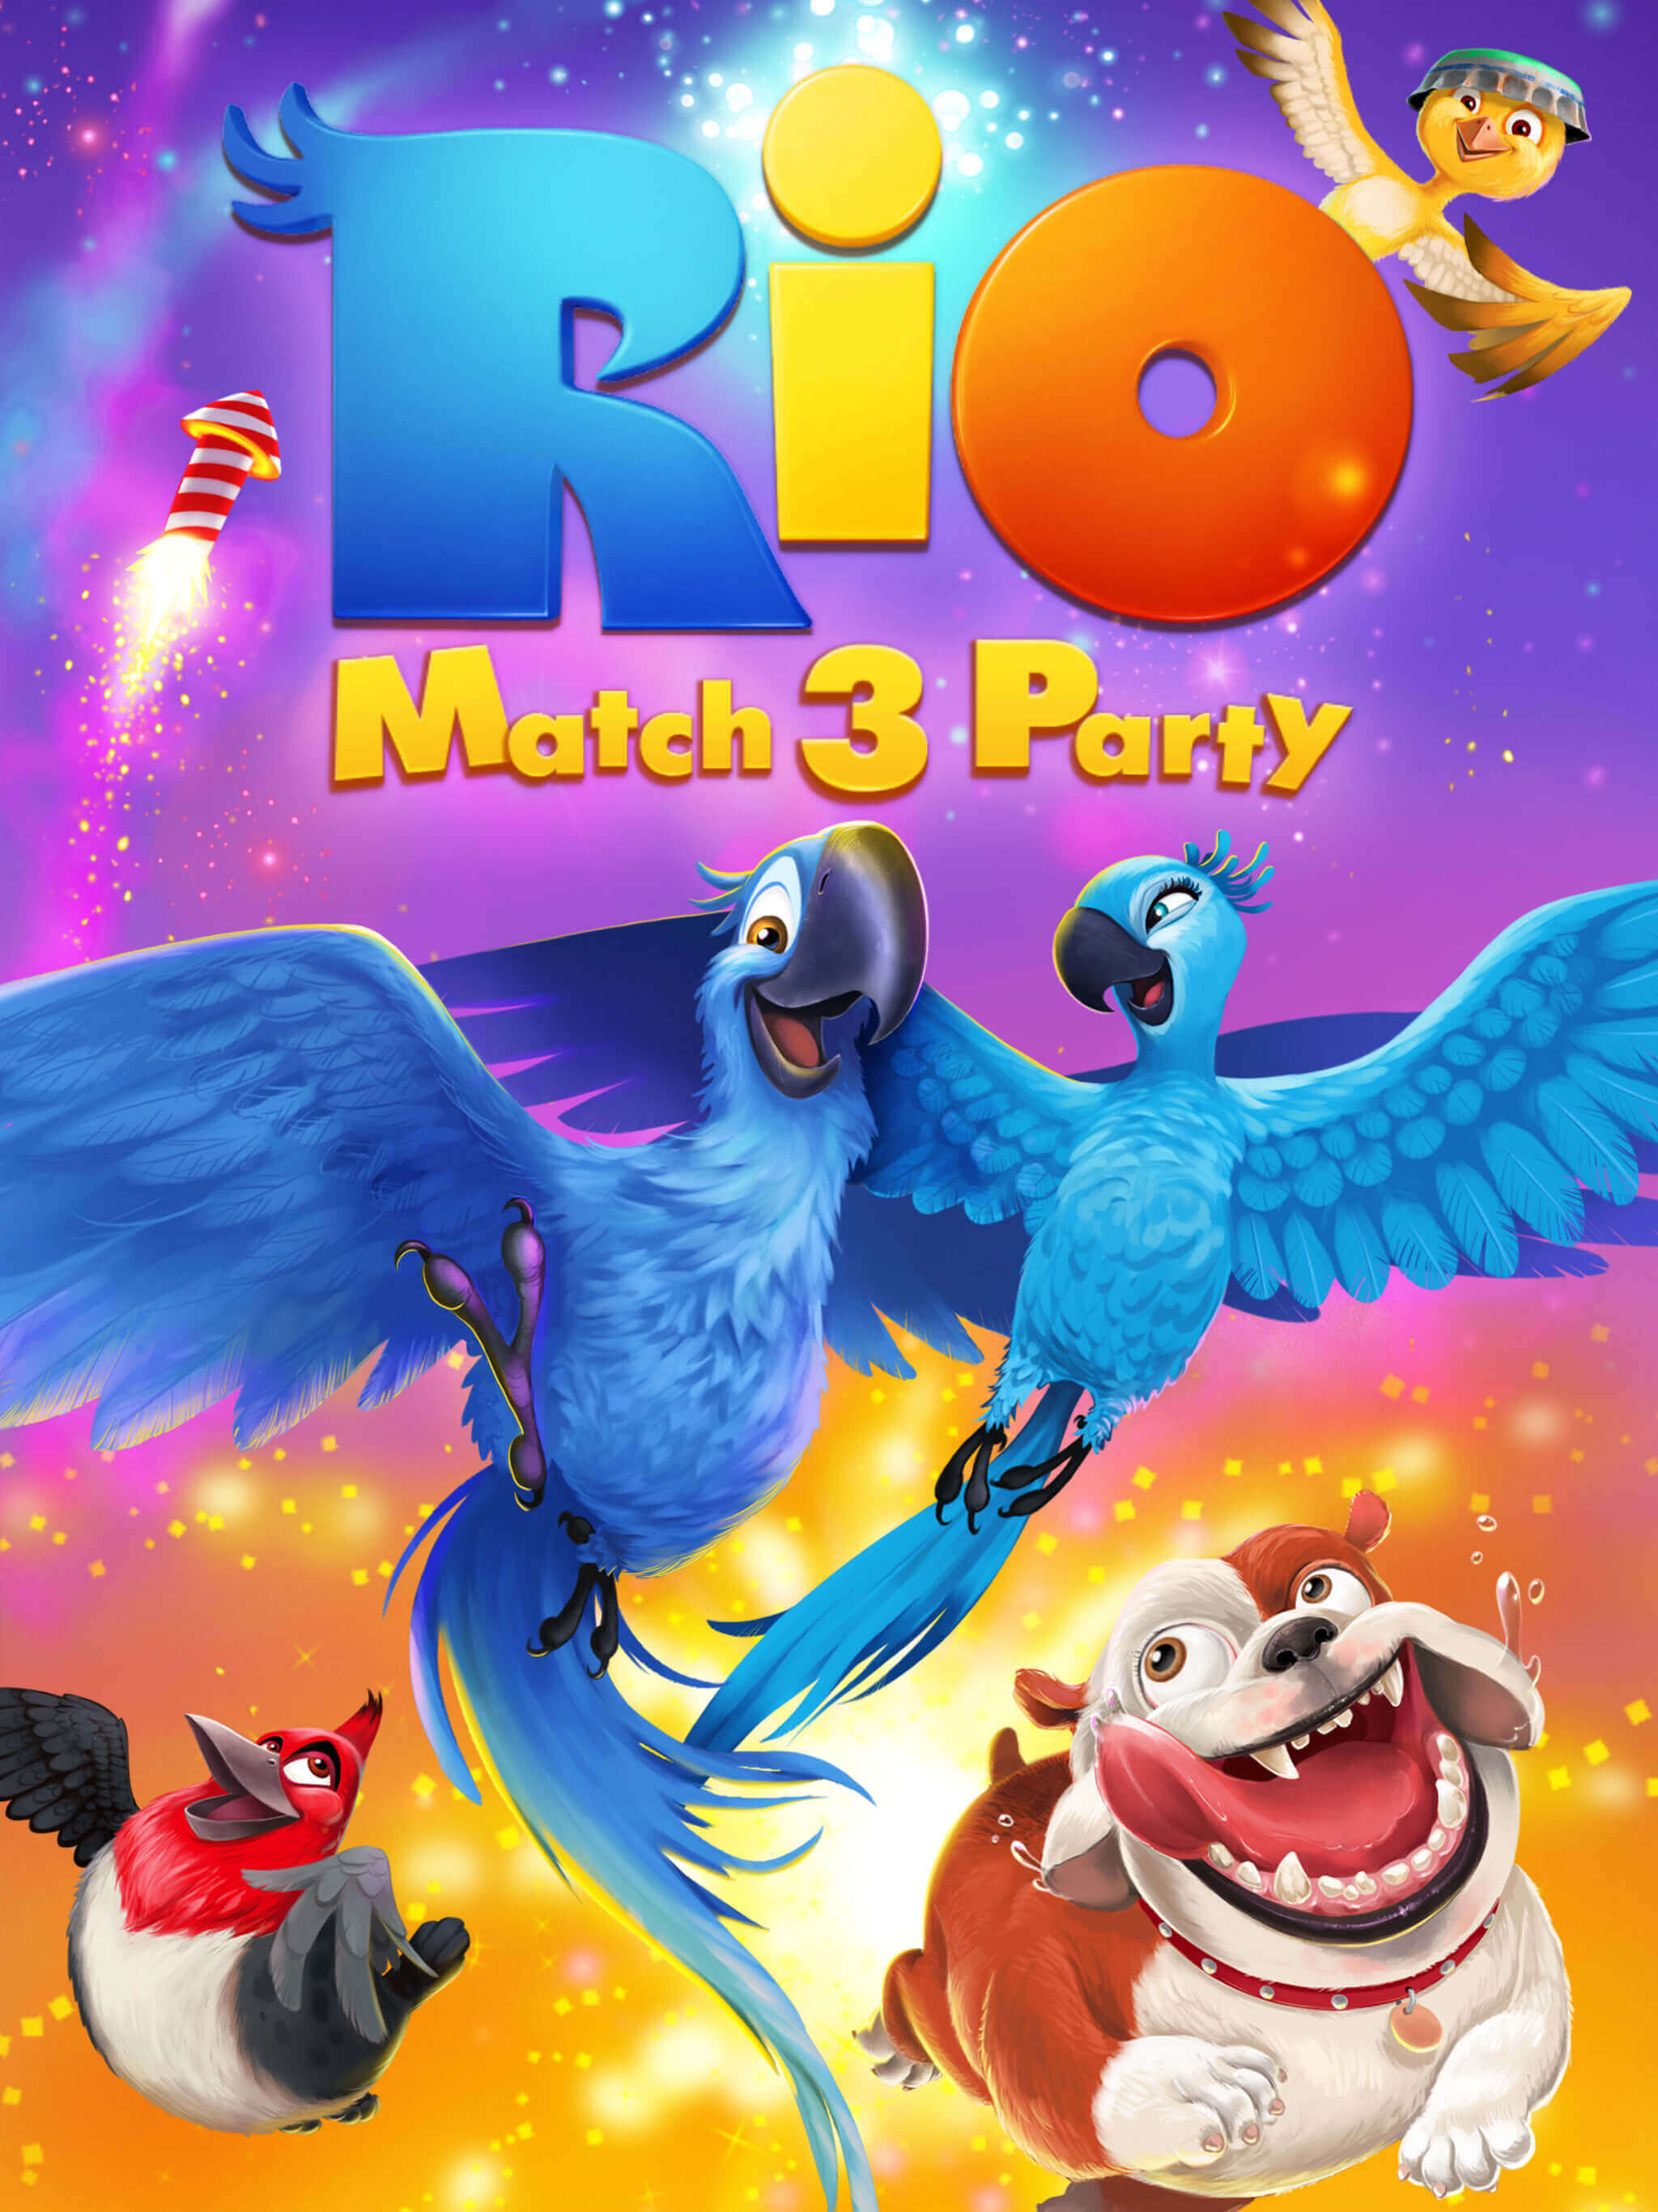 Rio match 3 party triche astuce perles or